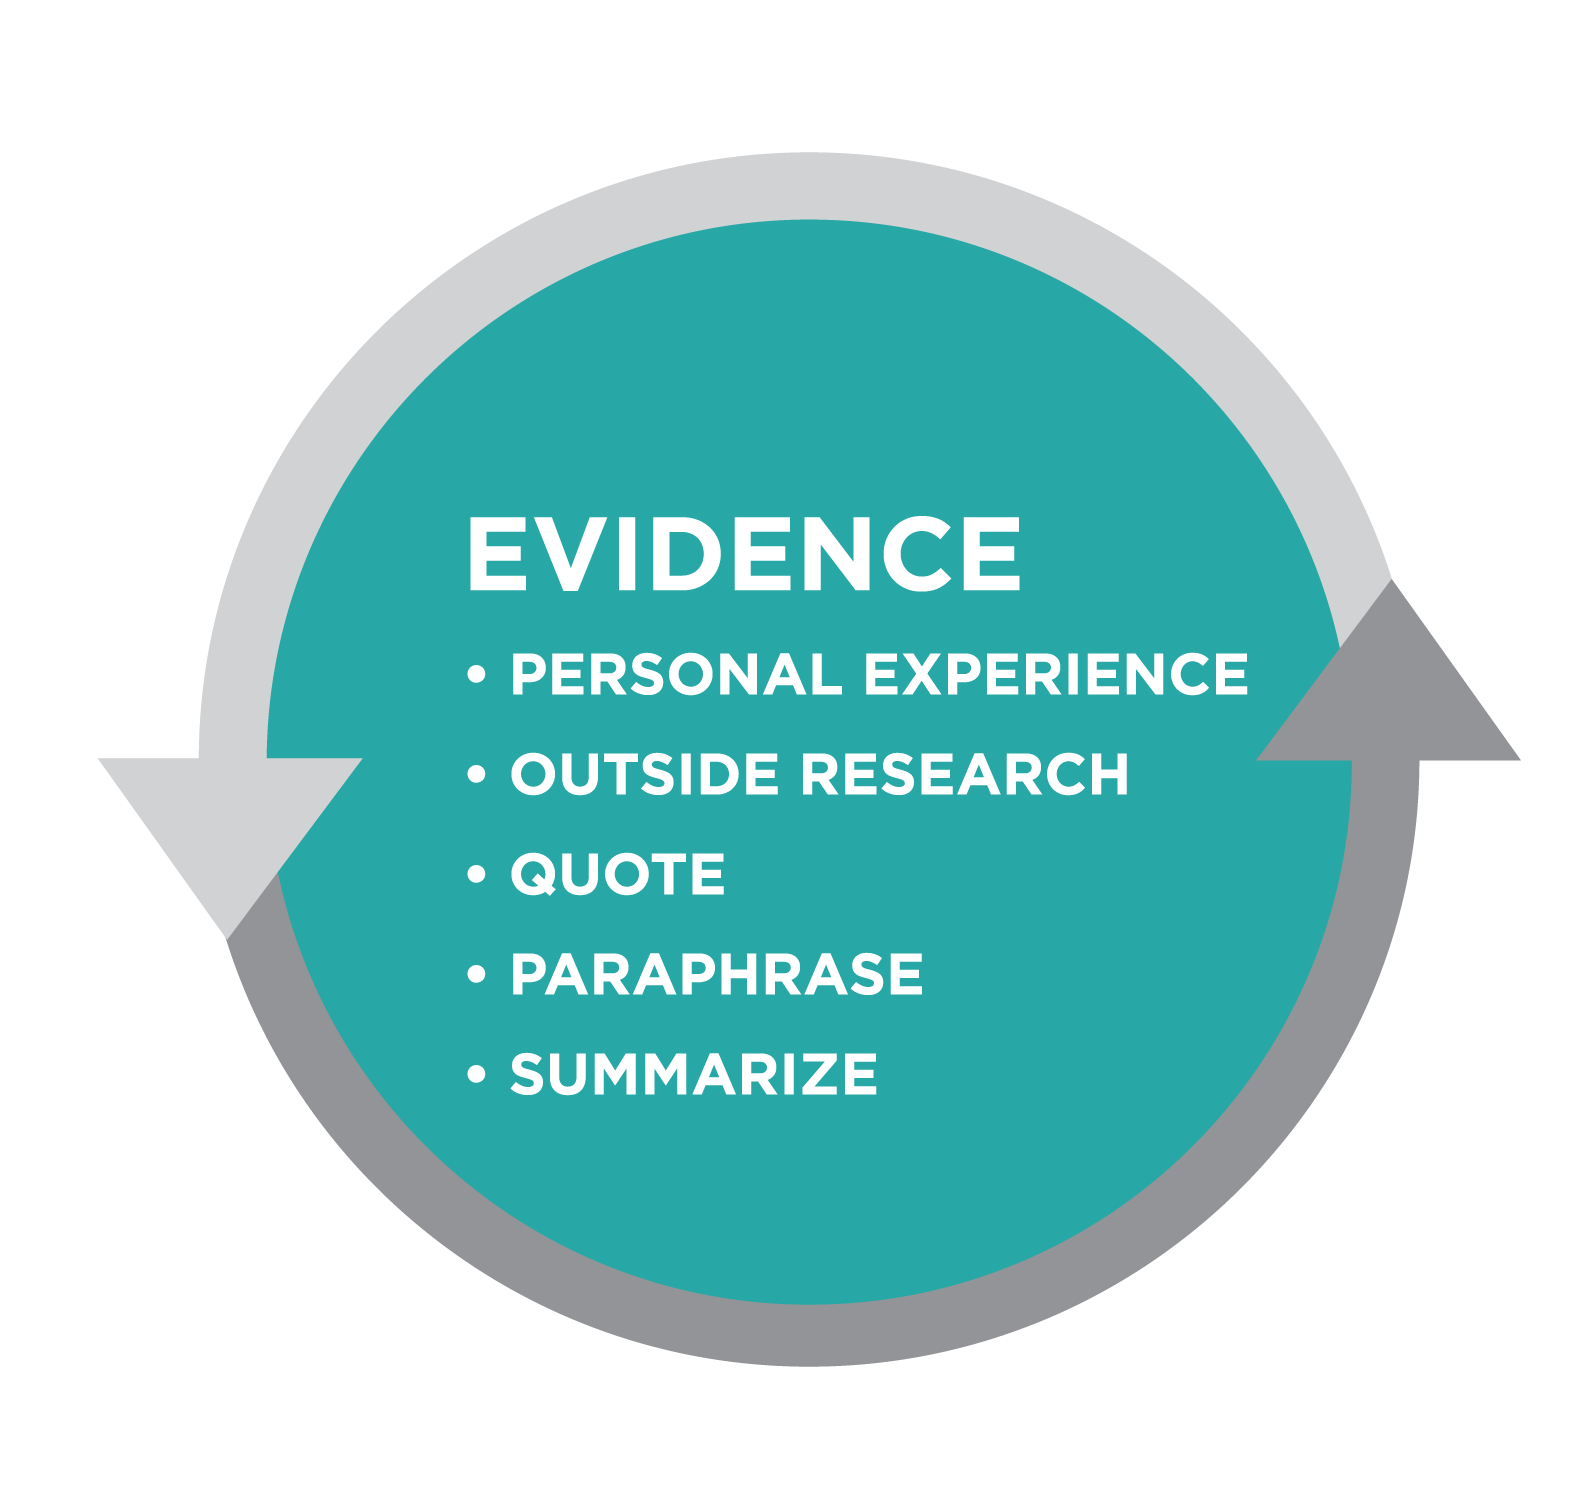 Graphic titled Evidence. Bullet list: Personal Experience, Outside Research, Quote, Paraphrase, Summarize. All is in a teal circle bordered by gray arrows.